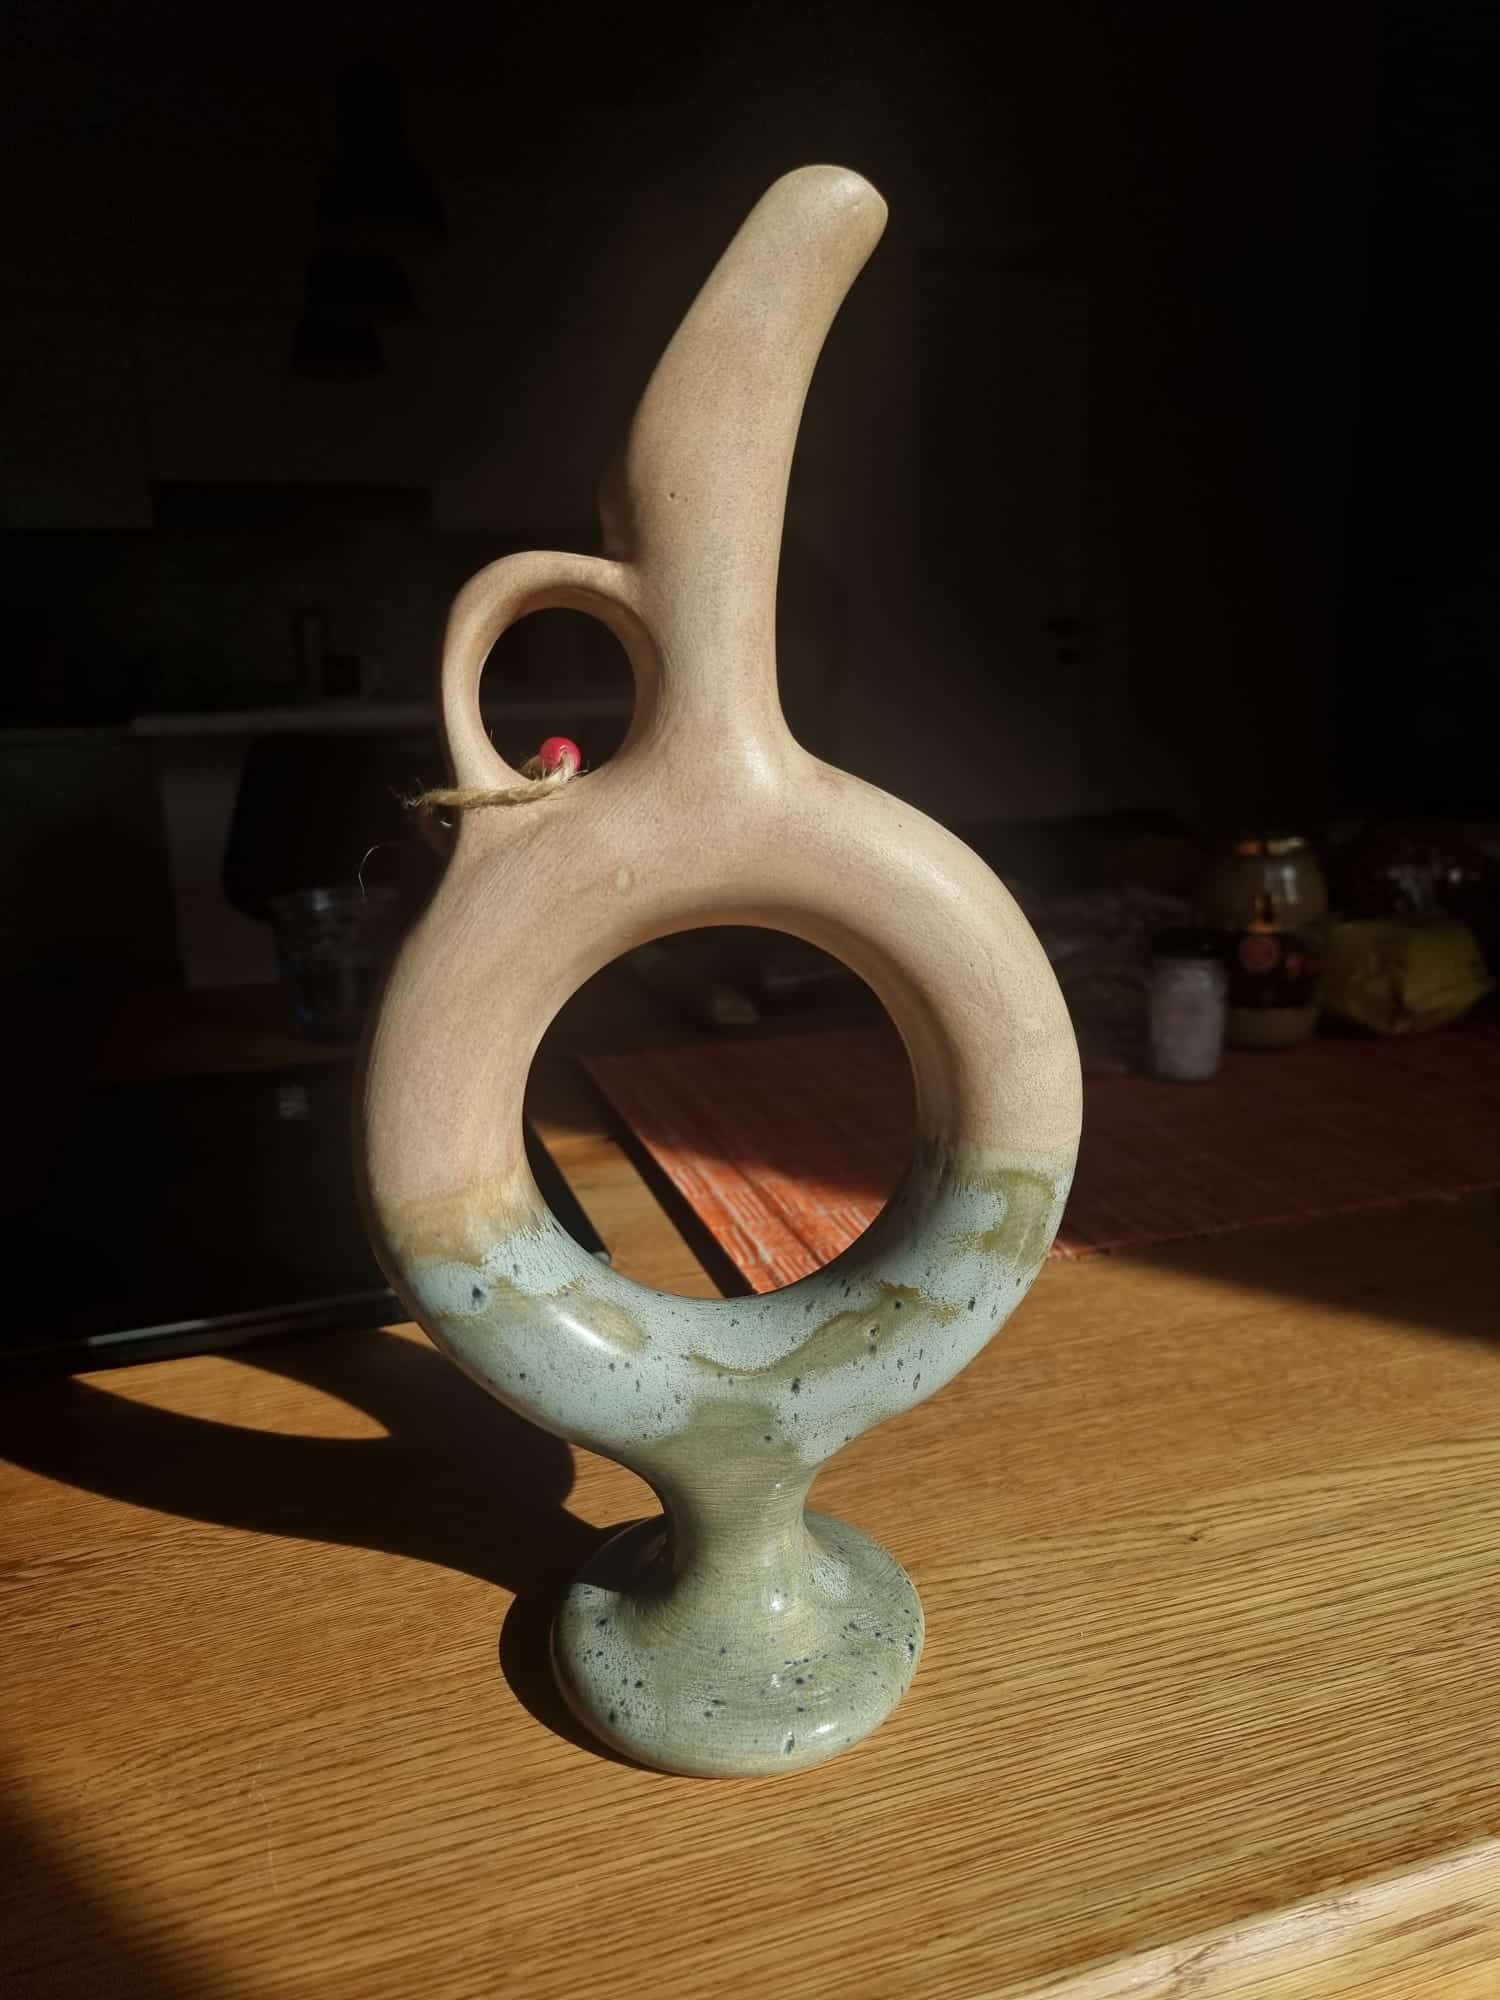 A ceramic pitcher with a unique loop handle and a speckled blue base stands on a wooden table, bathed in sunlight.